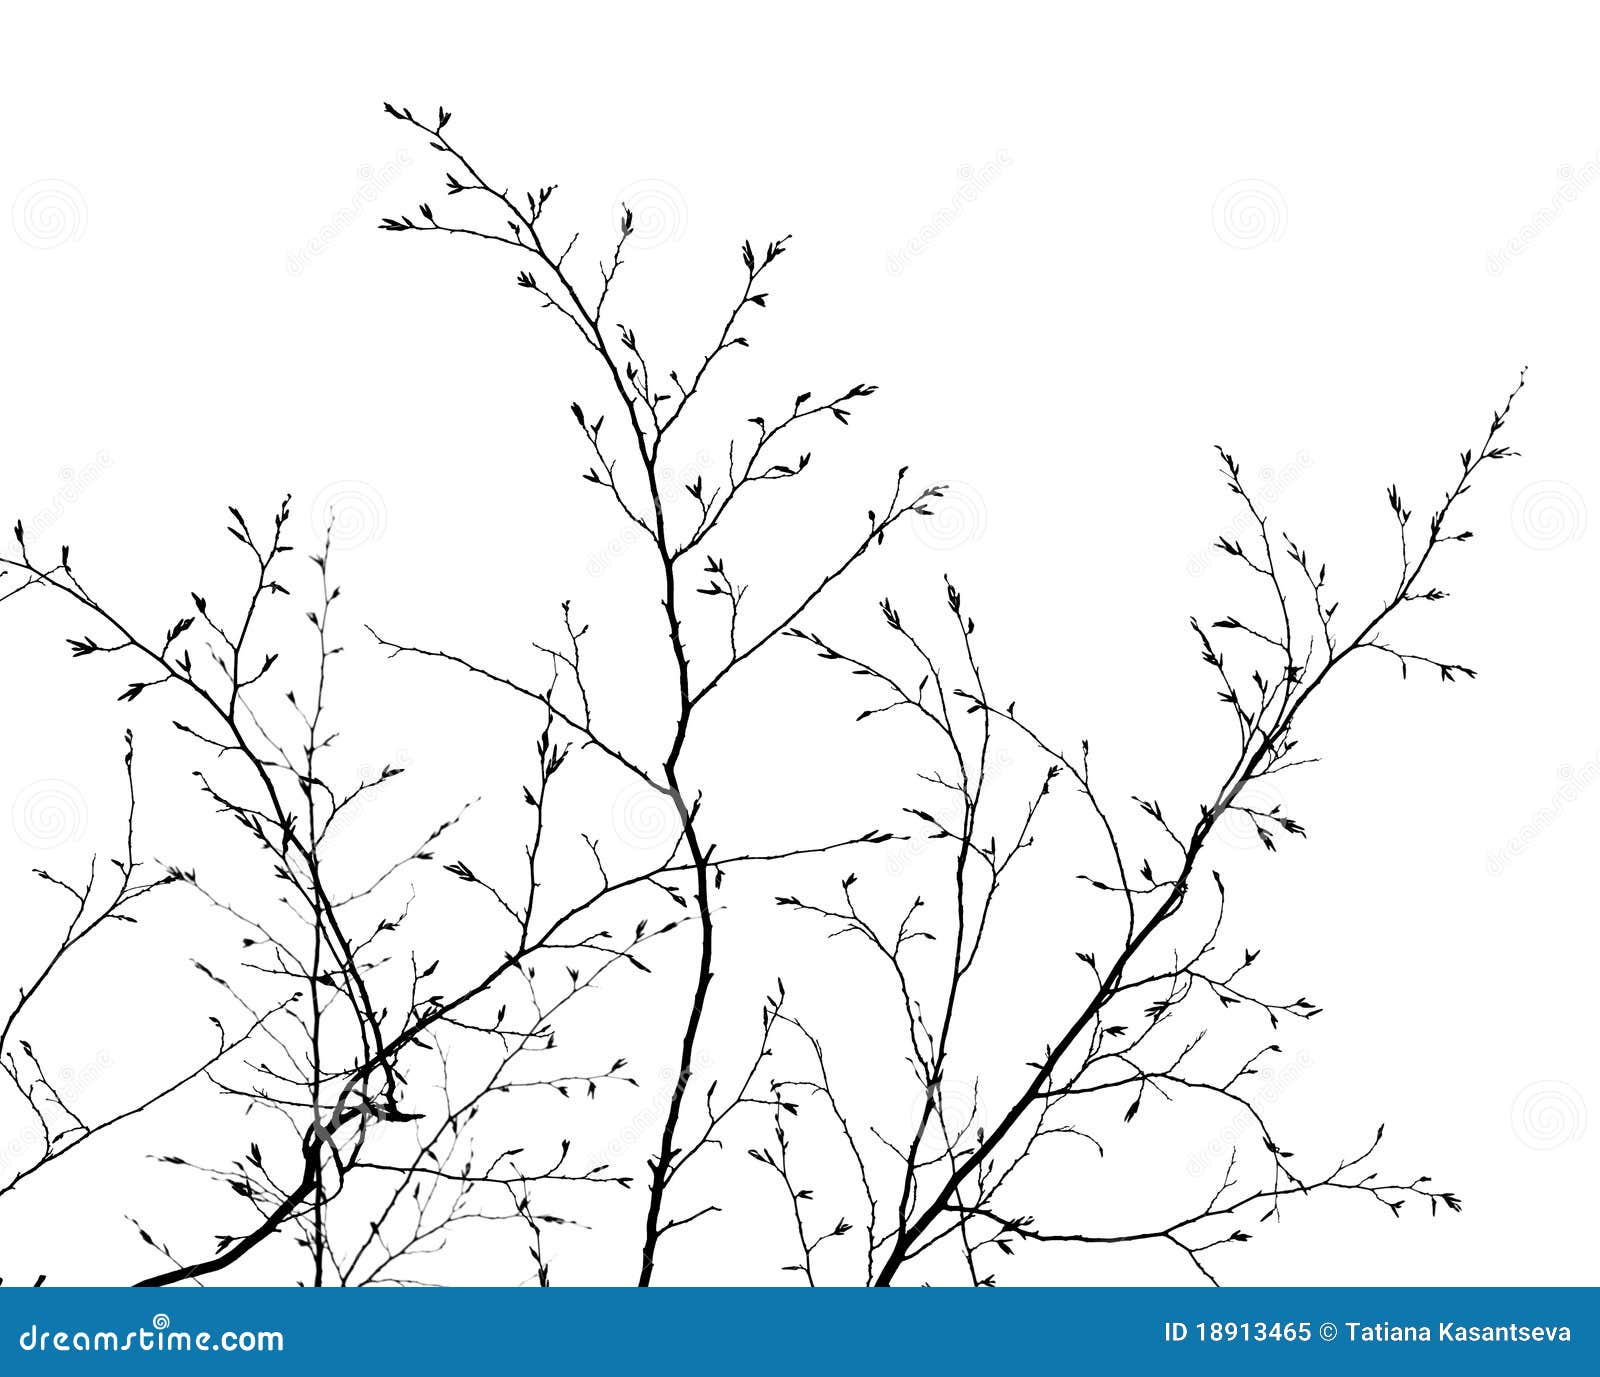 branches on white background